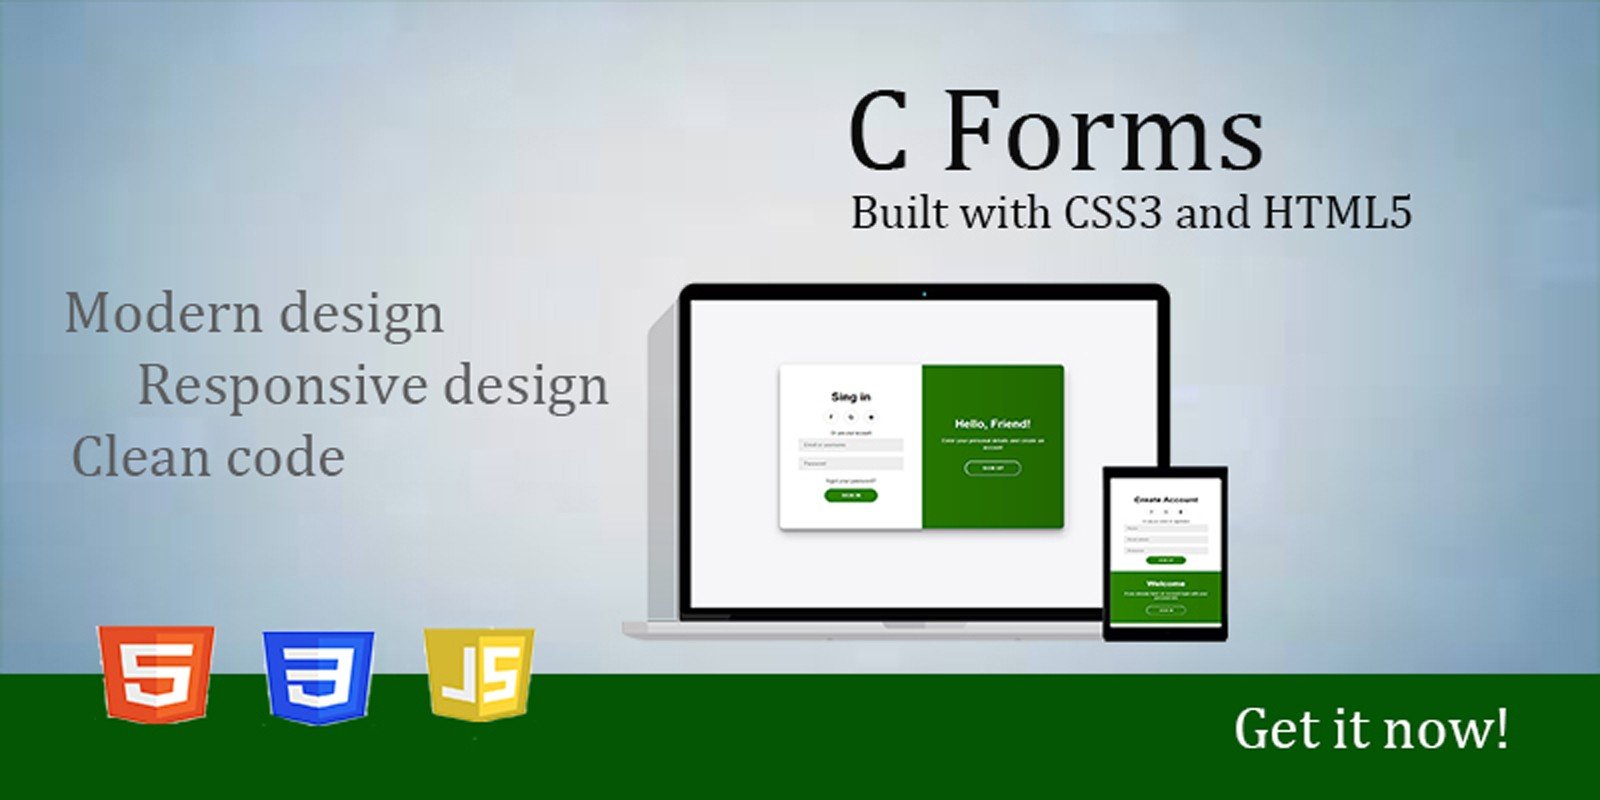 C Forms – Forms Built on CSS3 and HTML5